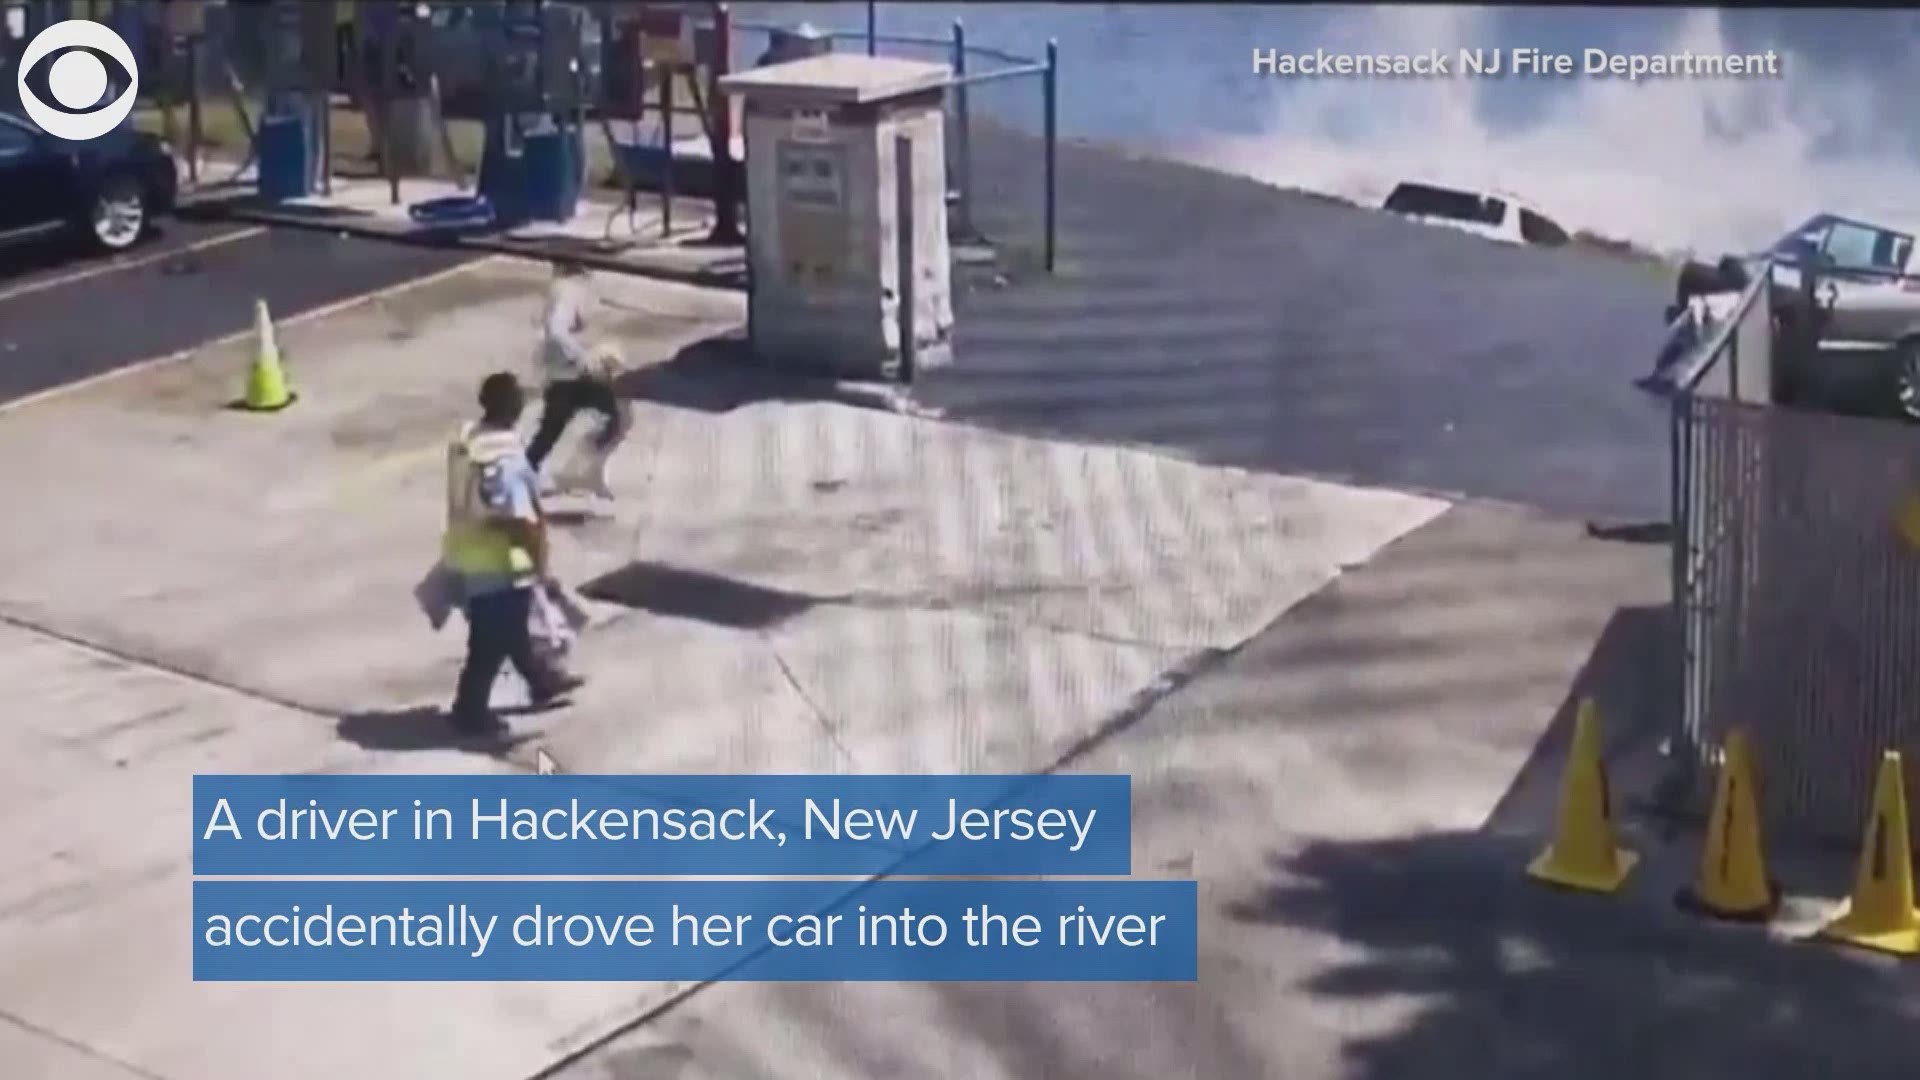 On Tuesday afternoon, a car accidentally drove into the Hackensack River in New Jersey. The driver was exiting a car wash, when she mistakenly hit the gas pedal instead of the brake. The driver injured her leg.